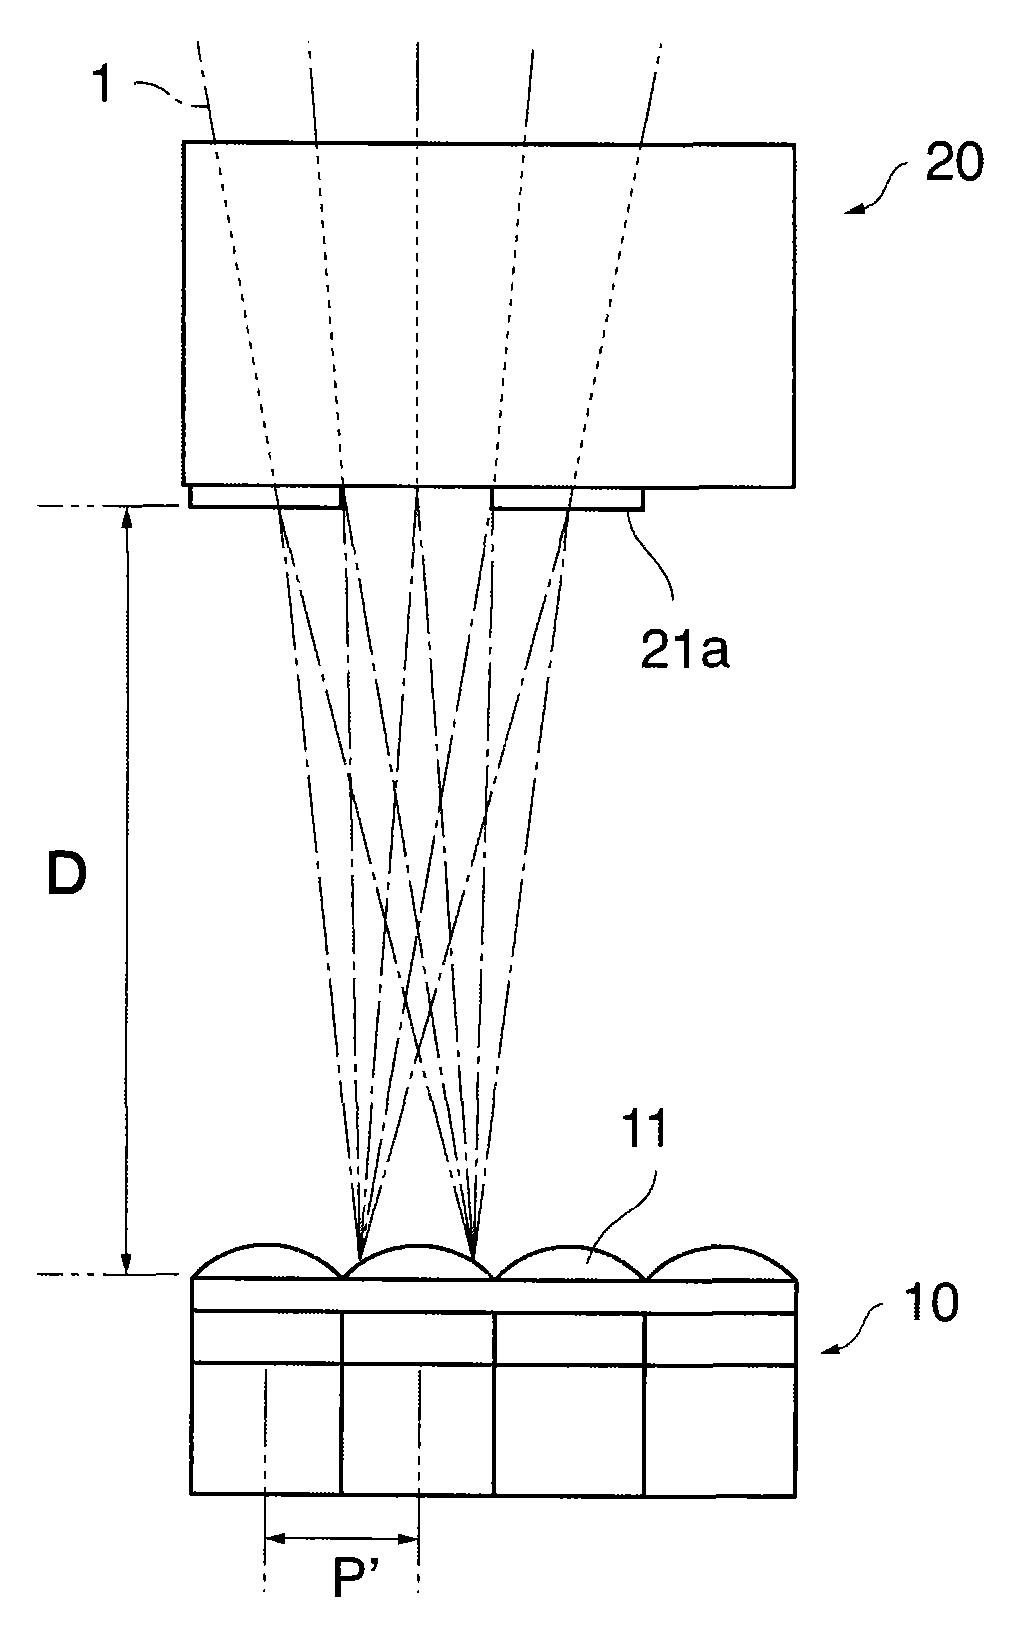 Image pickup element unit with an image pickup element on a substrate for picking up an image and an optical low pass filter spaced from the image pickup element